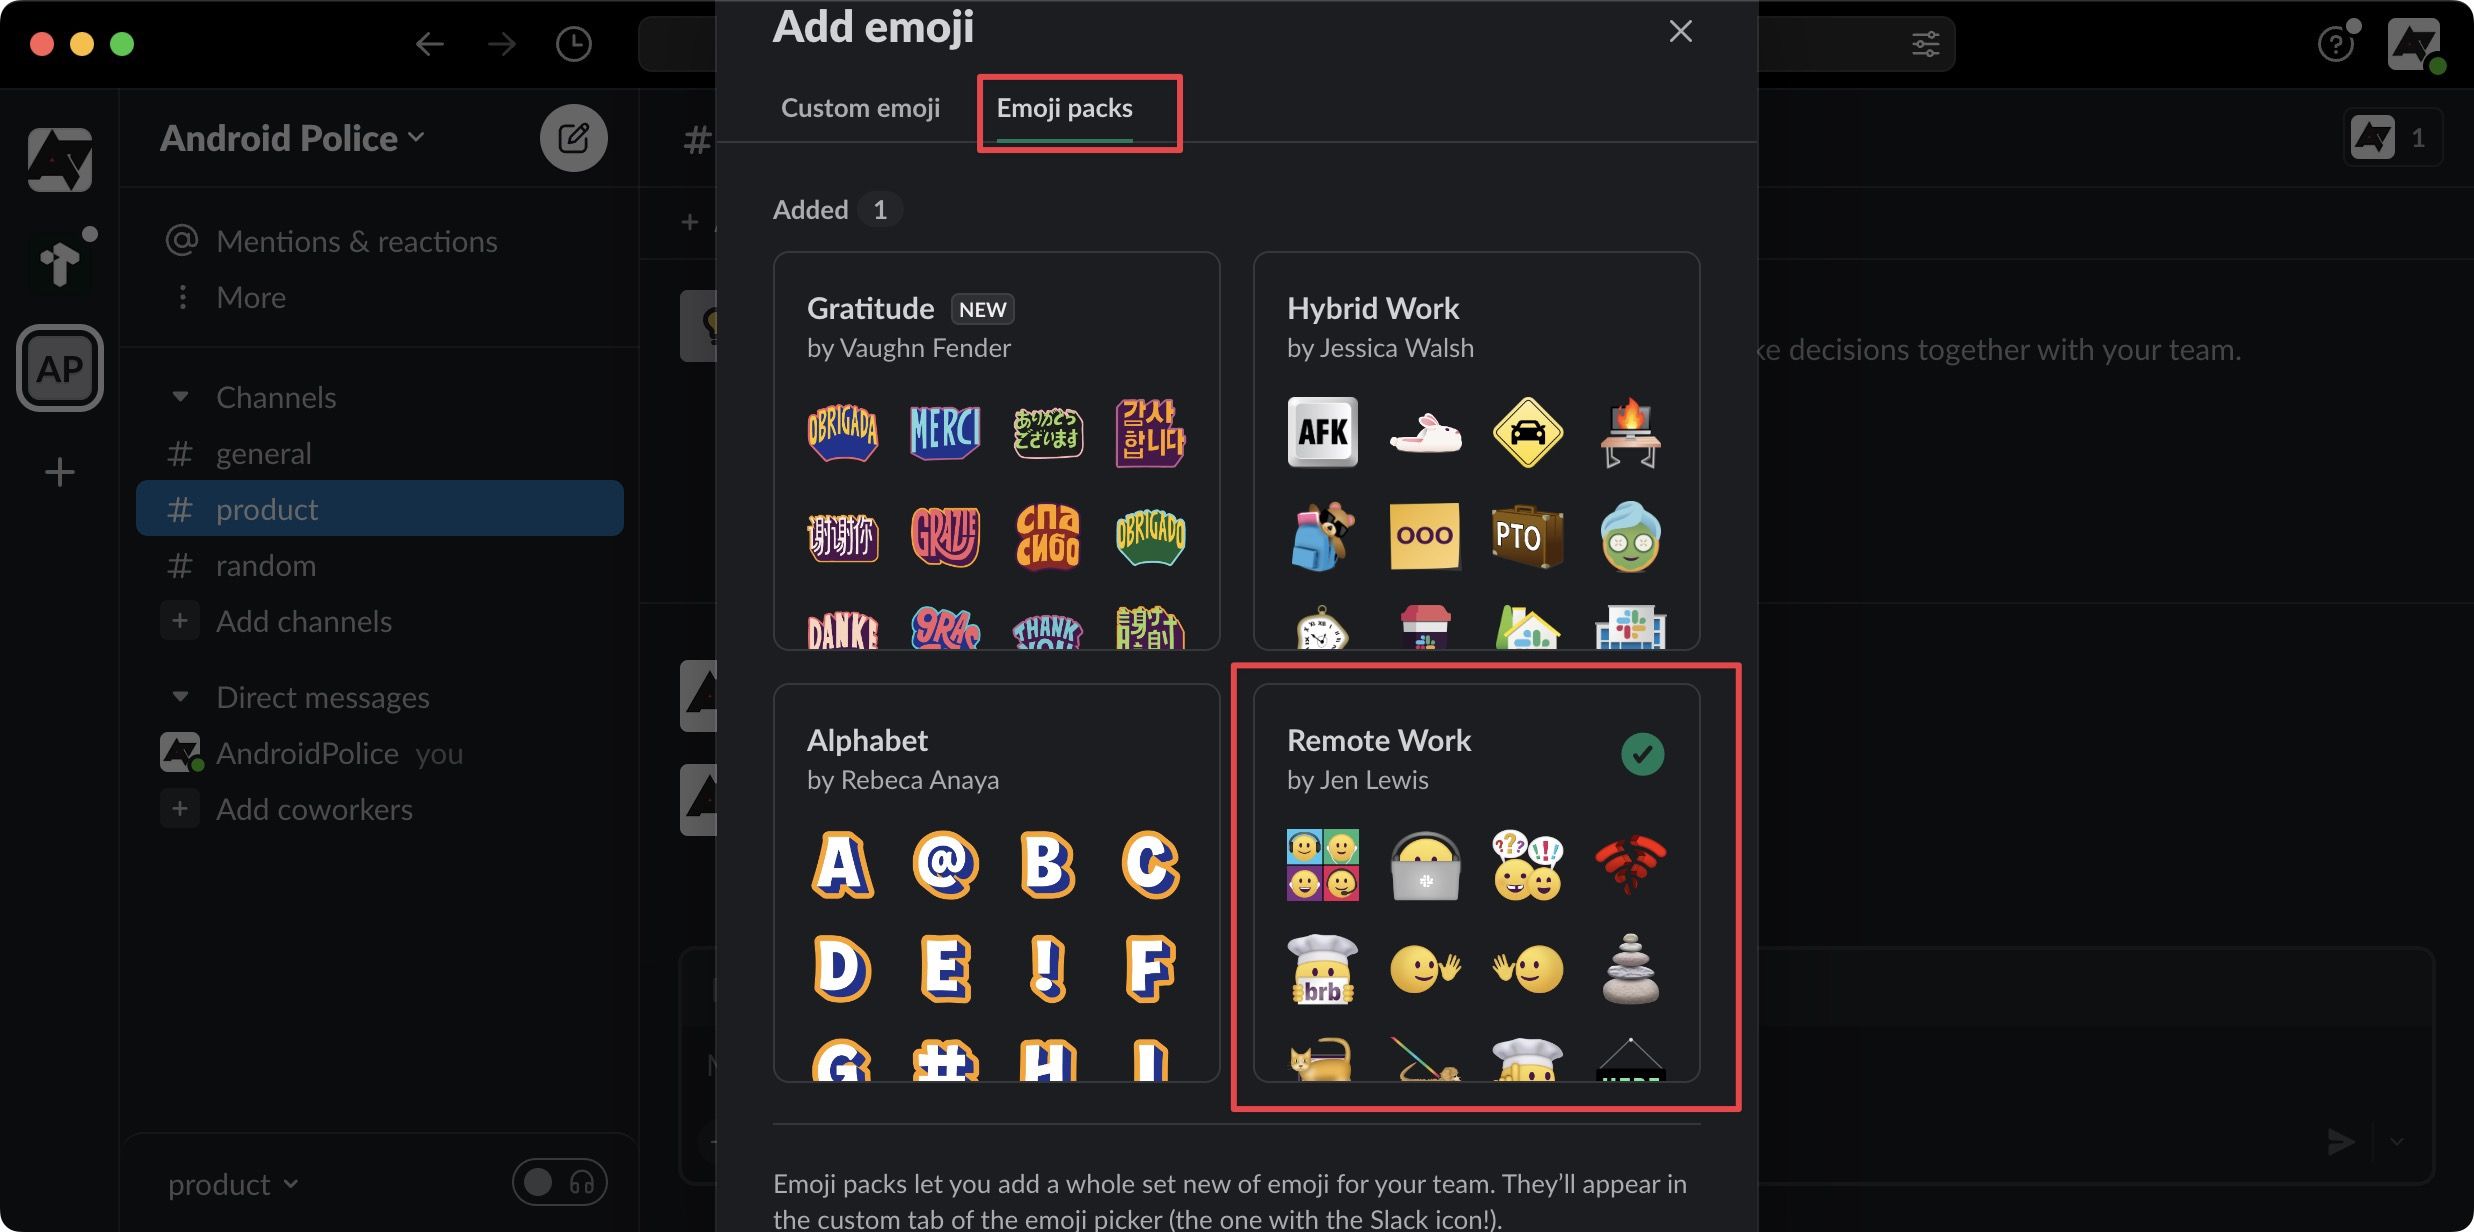 An image showing emoji packs in Slack, with the packs being highlighted in red for emphasis or selection.